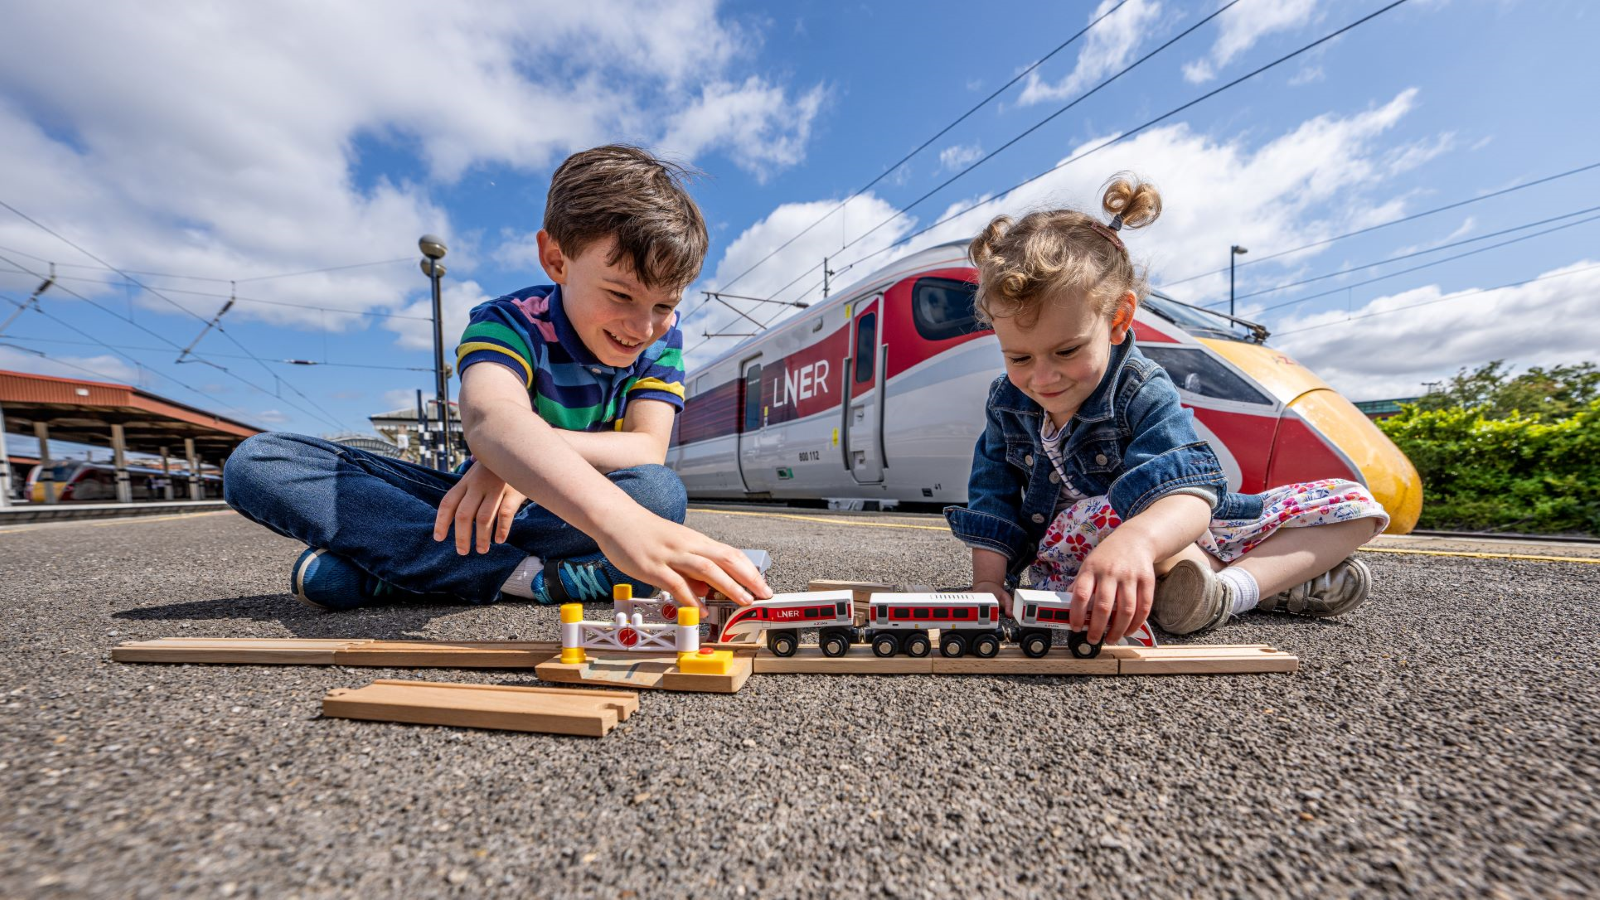 A model launch: LNER releases Azuma toy train in partnership with the National Railway Museum